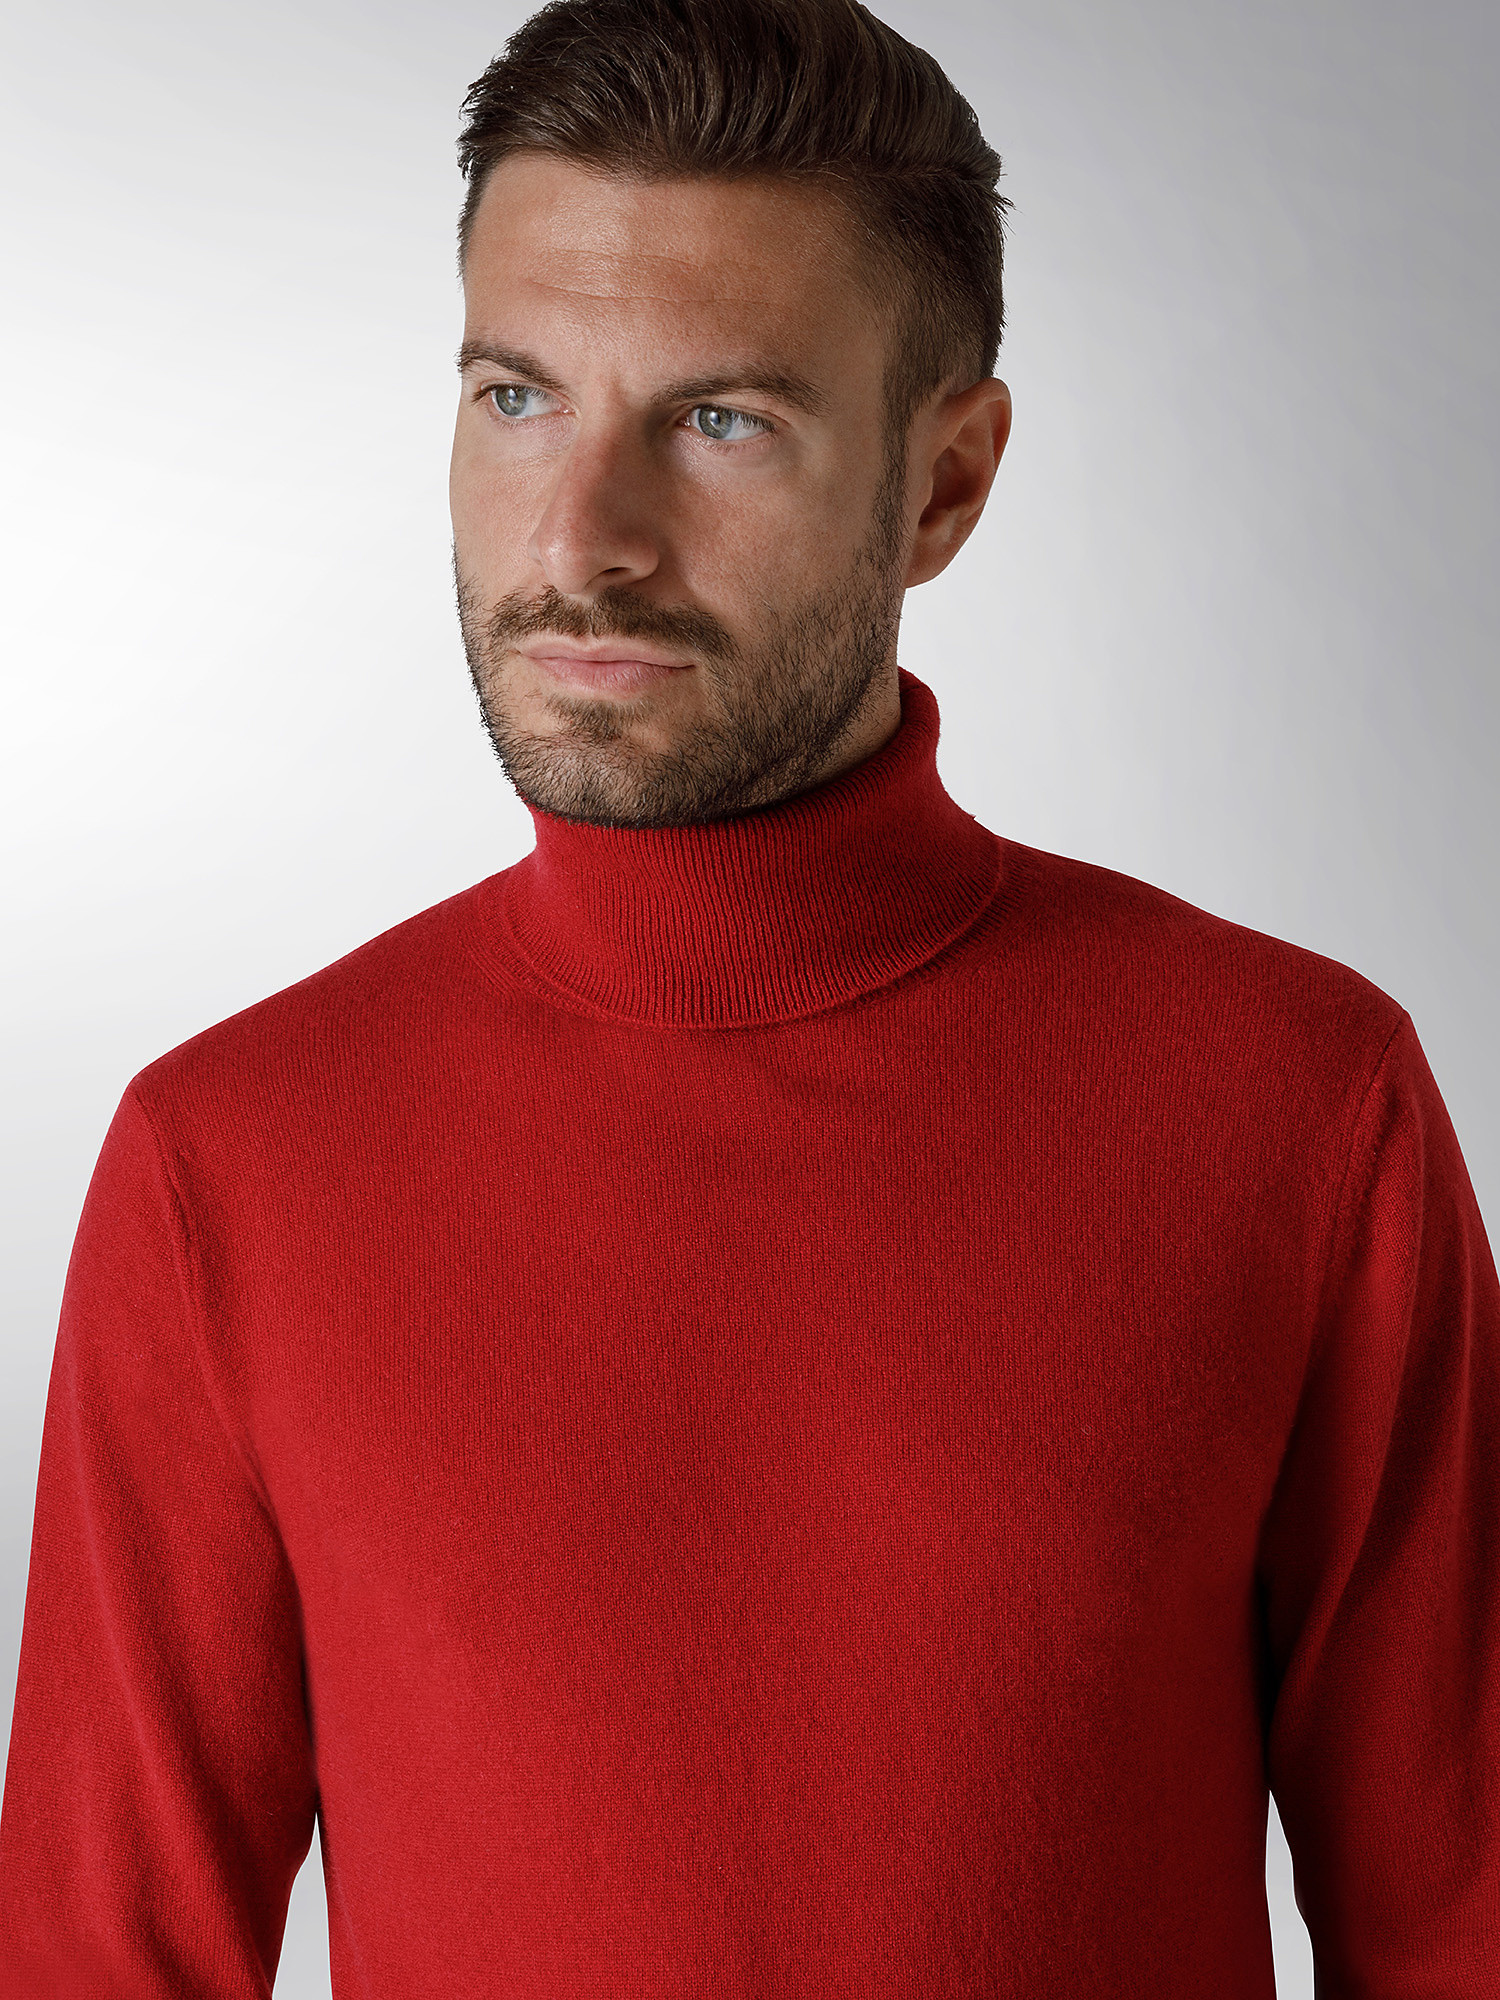 Coin Cashmere - Dolcevita in puro cashmere, Rosso, large image number 3